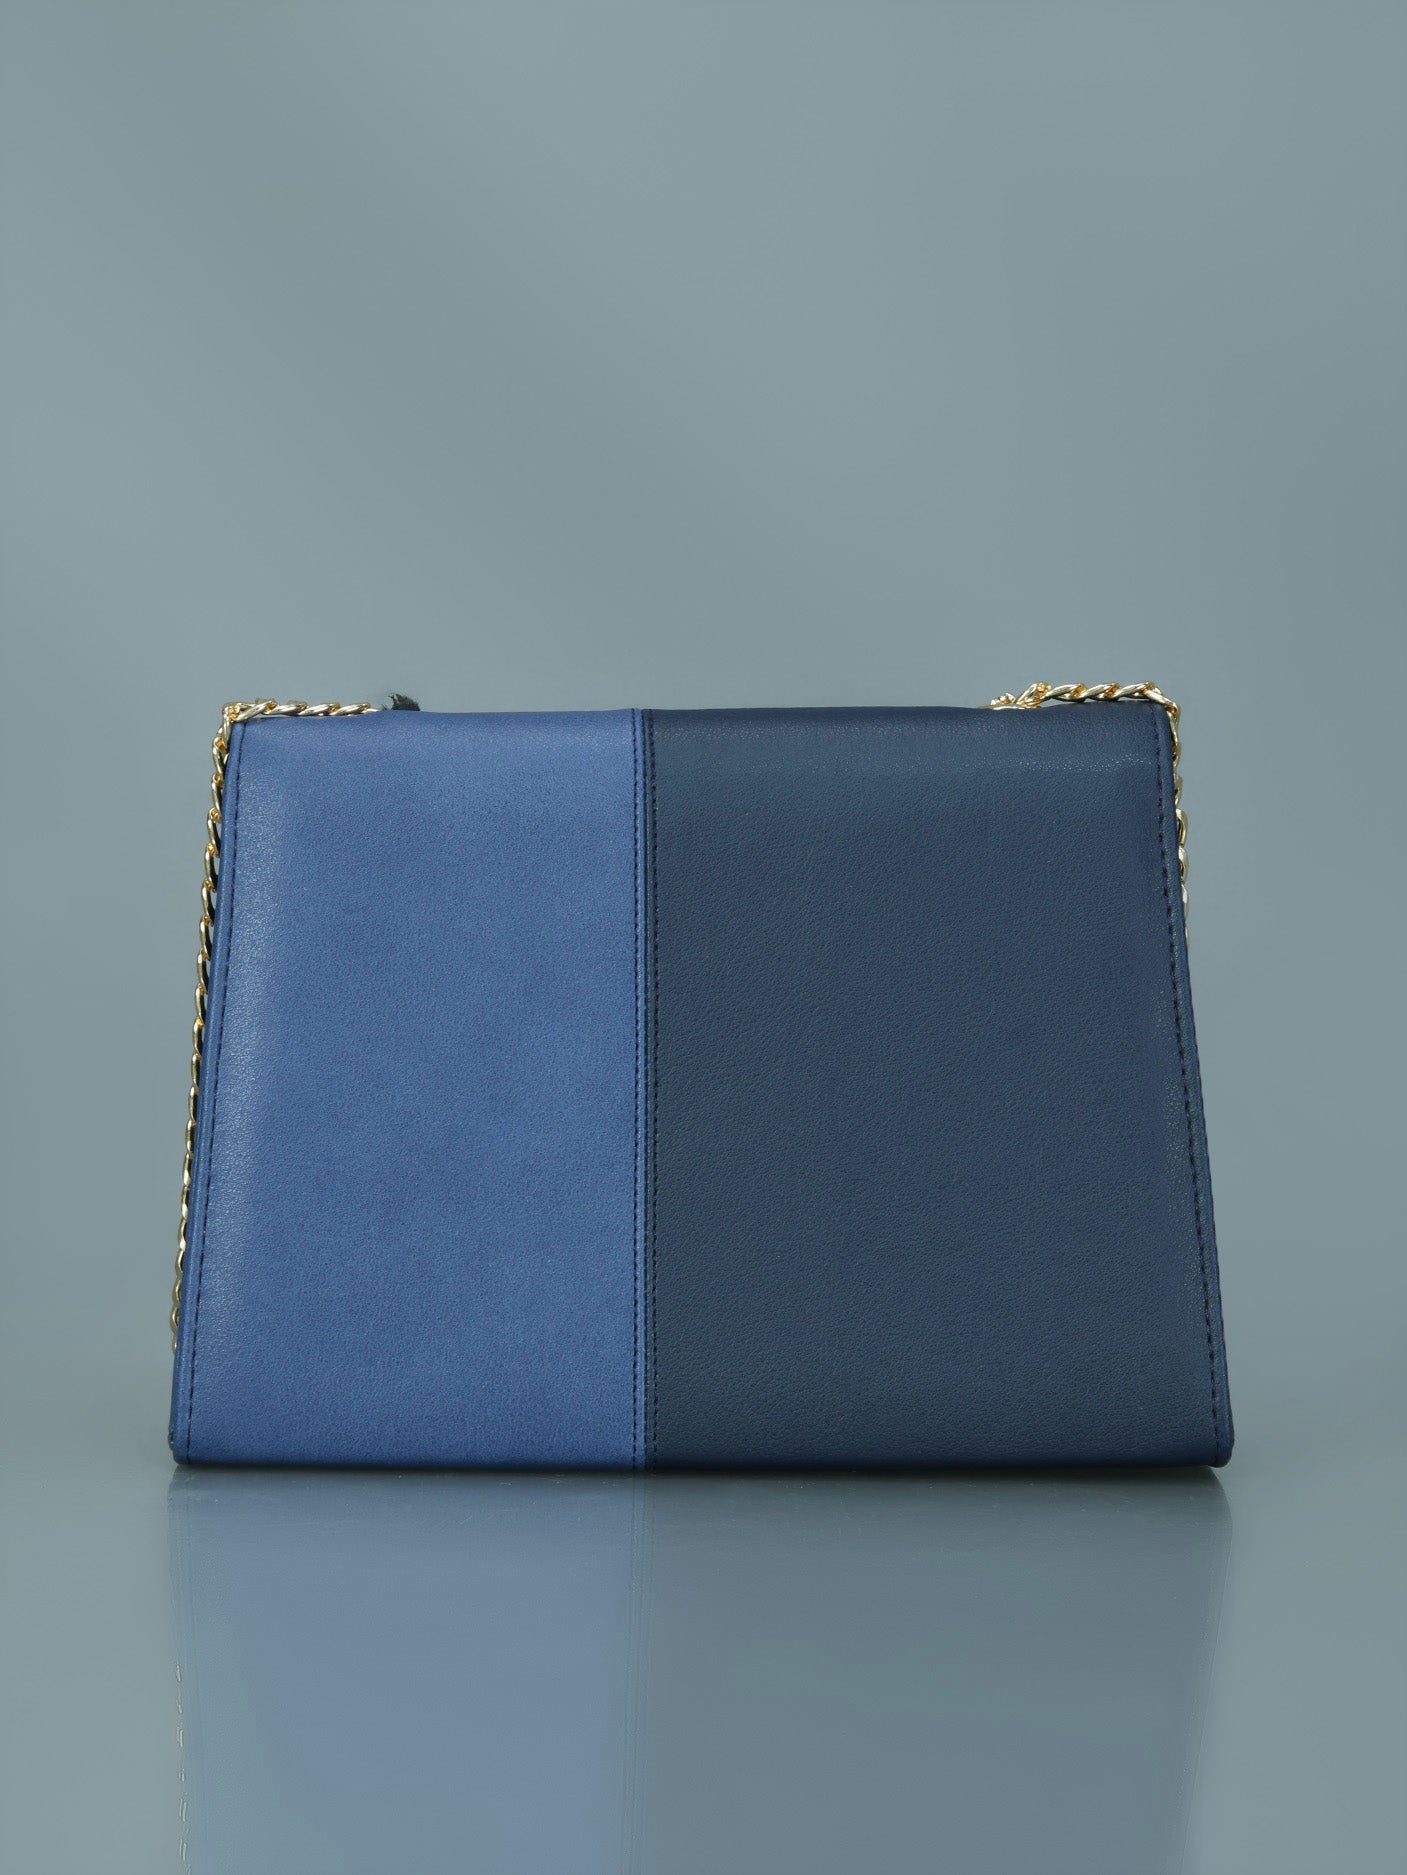 Two-Toned Textured Clutch